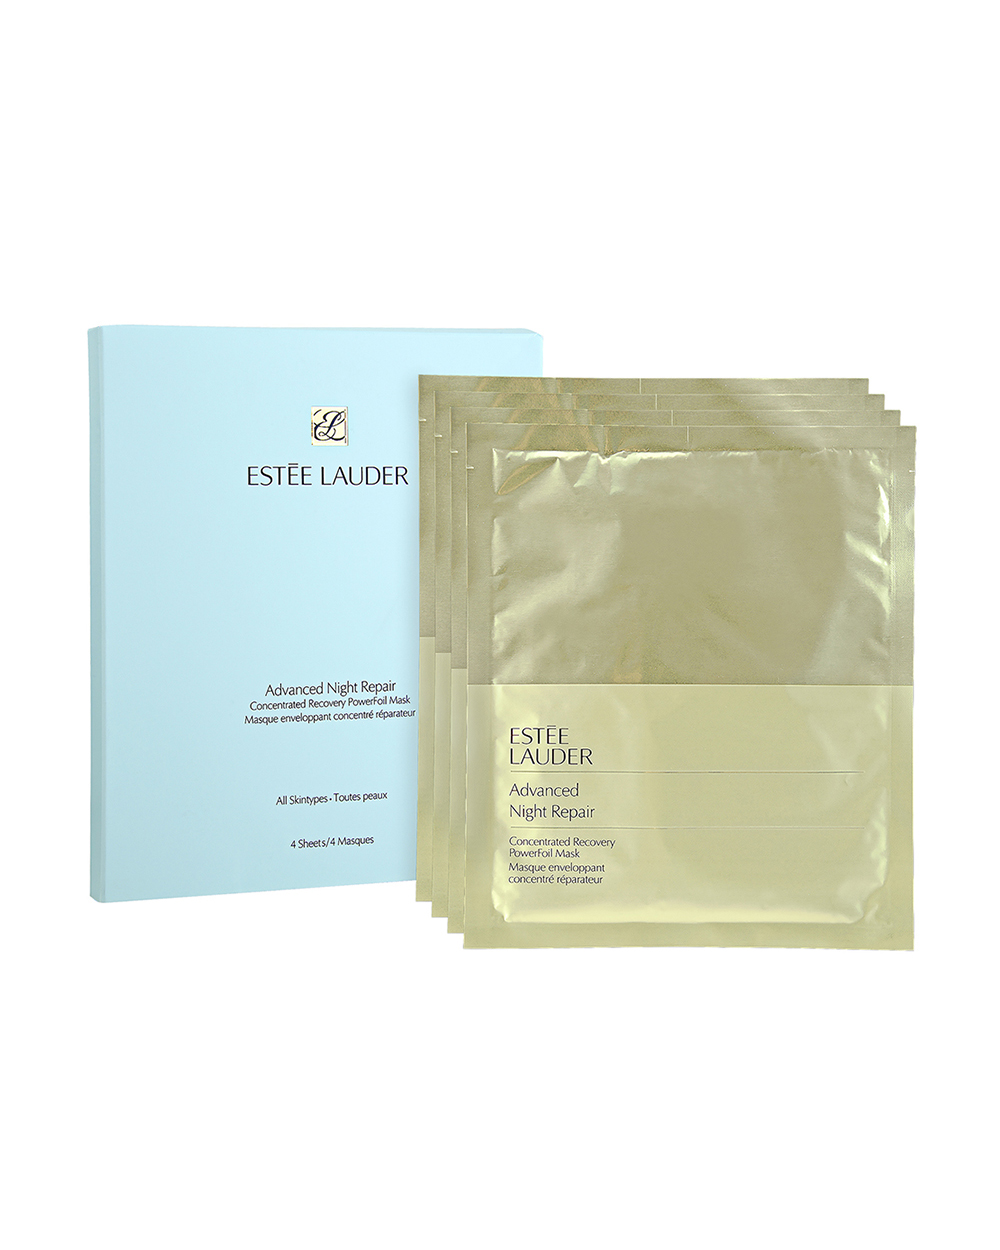 Estee Lauder ADVANCED NIGHT REPAIR CONCENTRATED RECOVERY POWERFOIL MASK, $152 from Smith and Caughey's